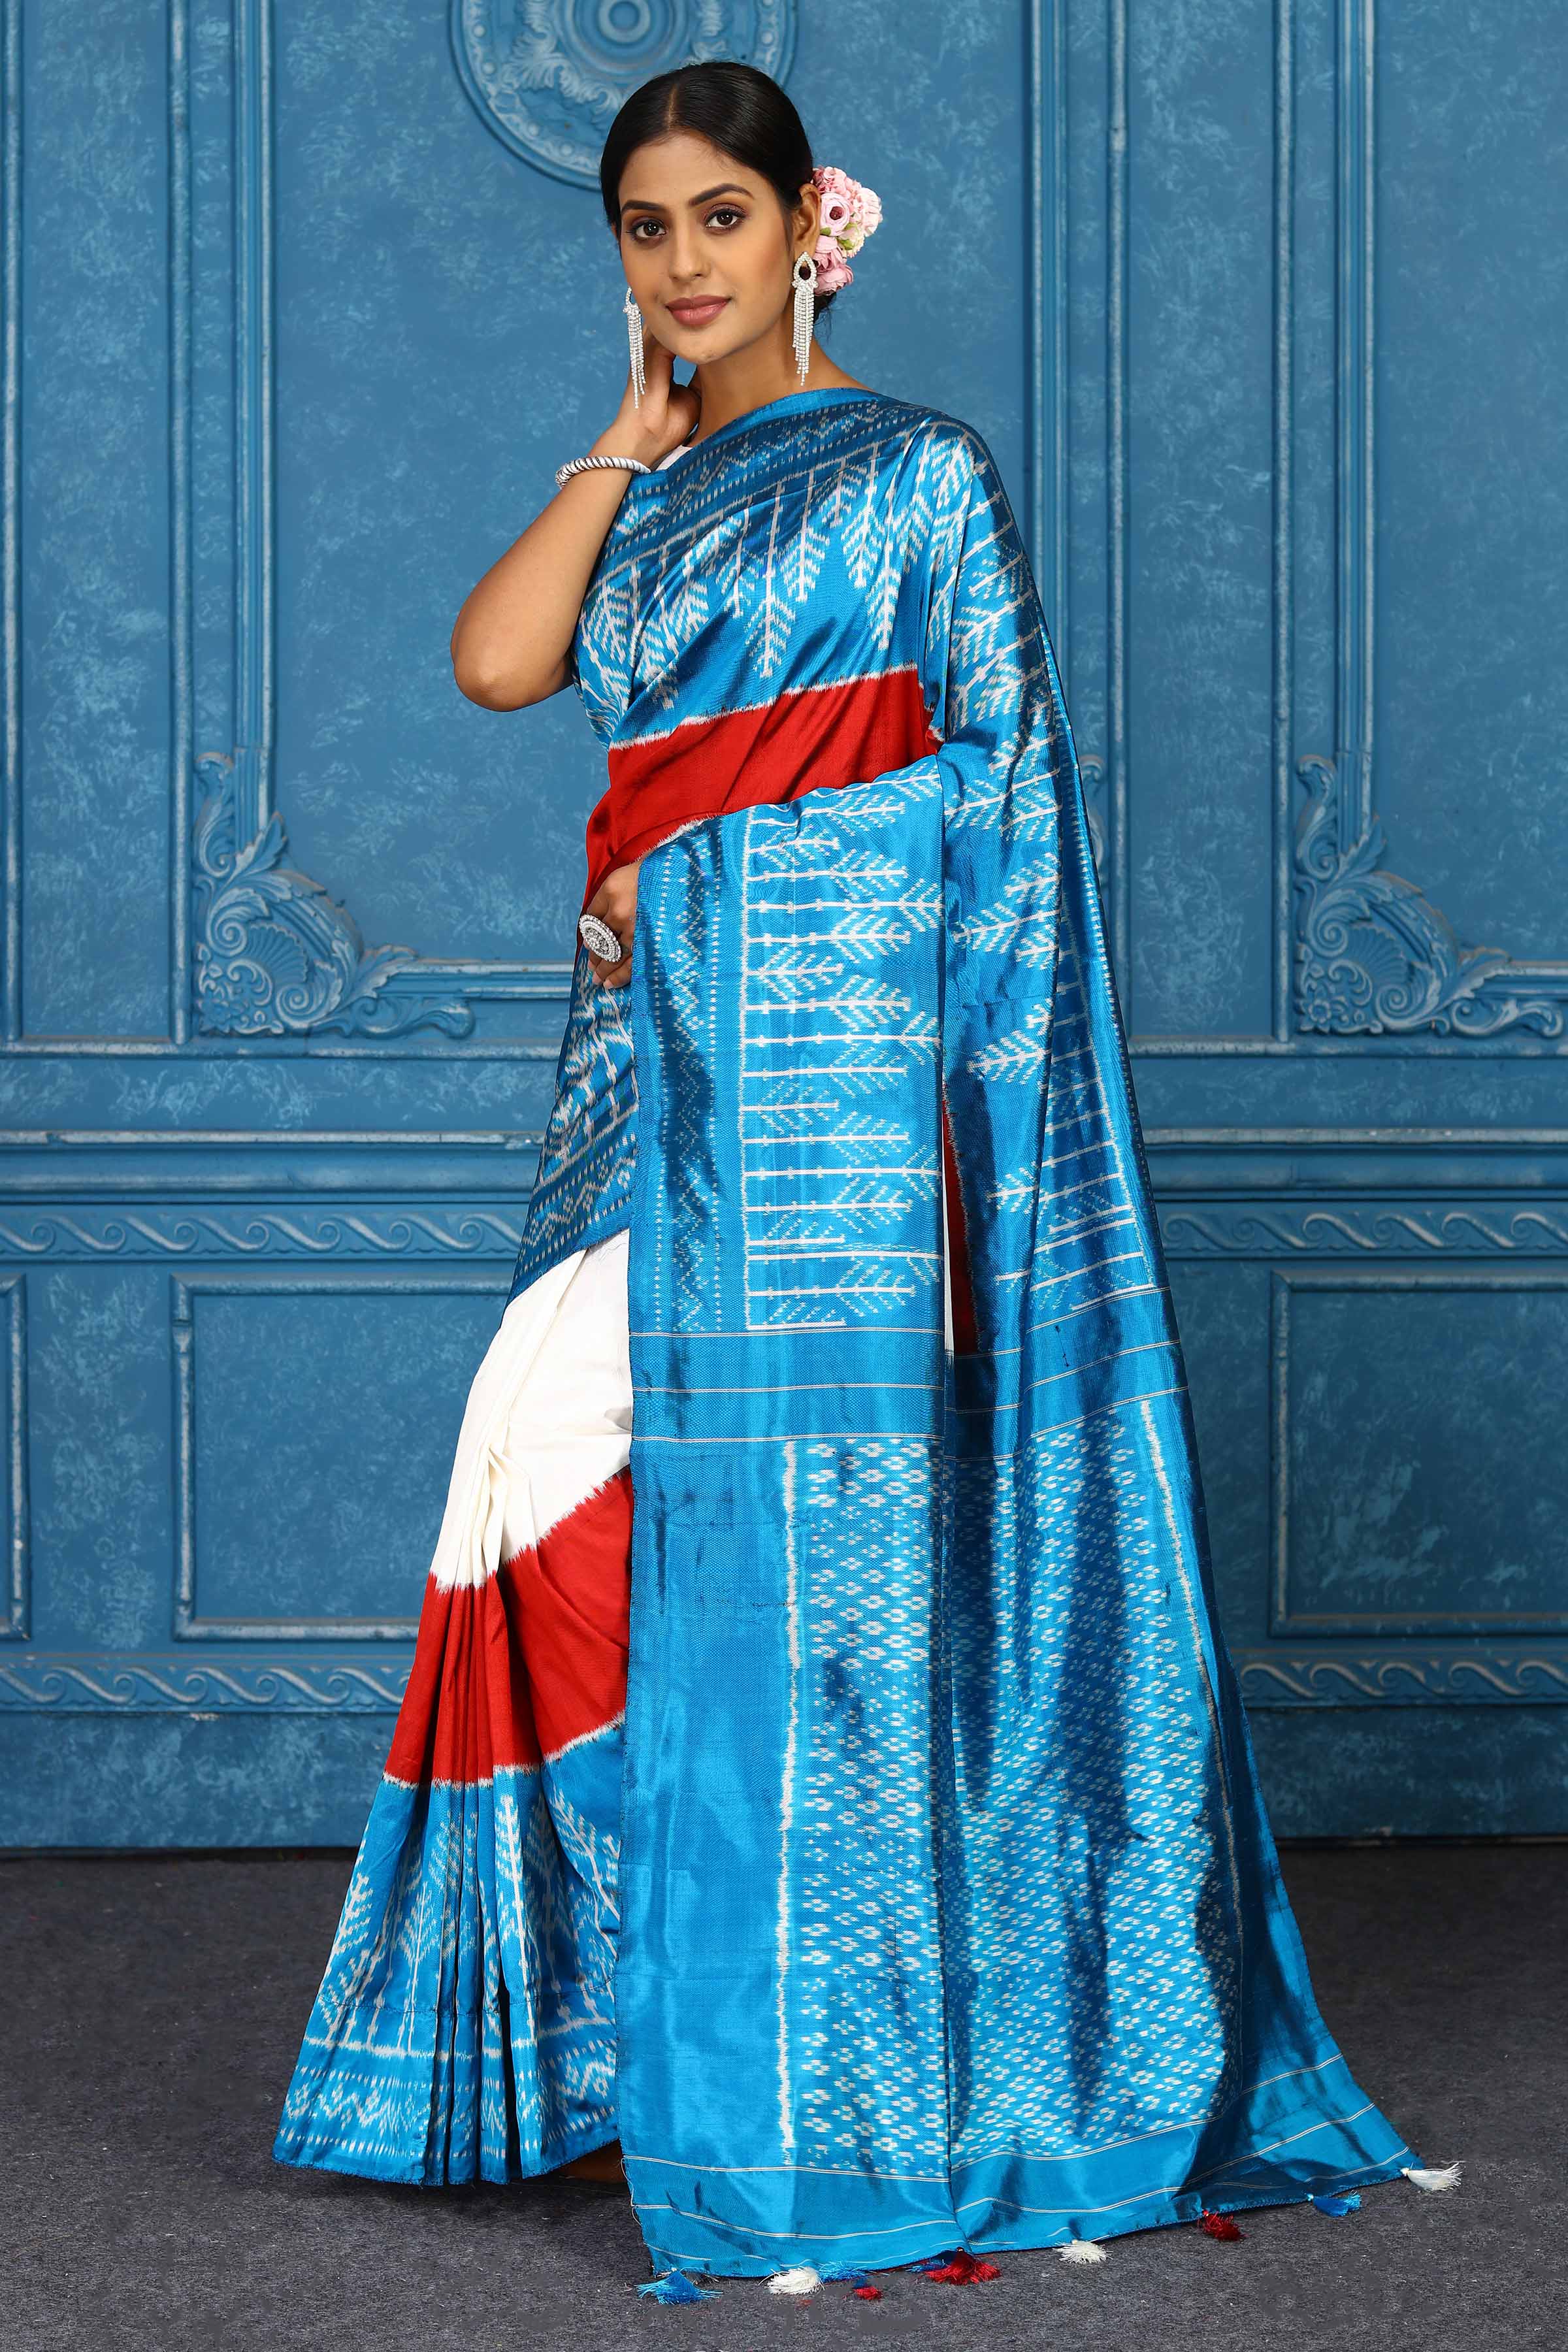 Buy cream and turquoise blue pochampally silk ikkat sari online in USA. Look your best on festive occasions in latest designer sarees, pure silk sarees, Kanchipuram sarees, handwoven sarees, tussar silk sarees, embroidered sarees from Pure Elegance Indian clothing store in USA.-pallu